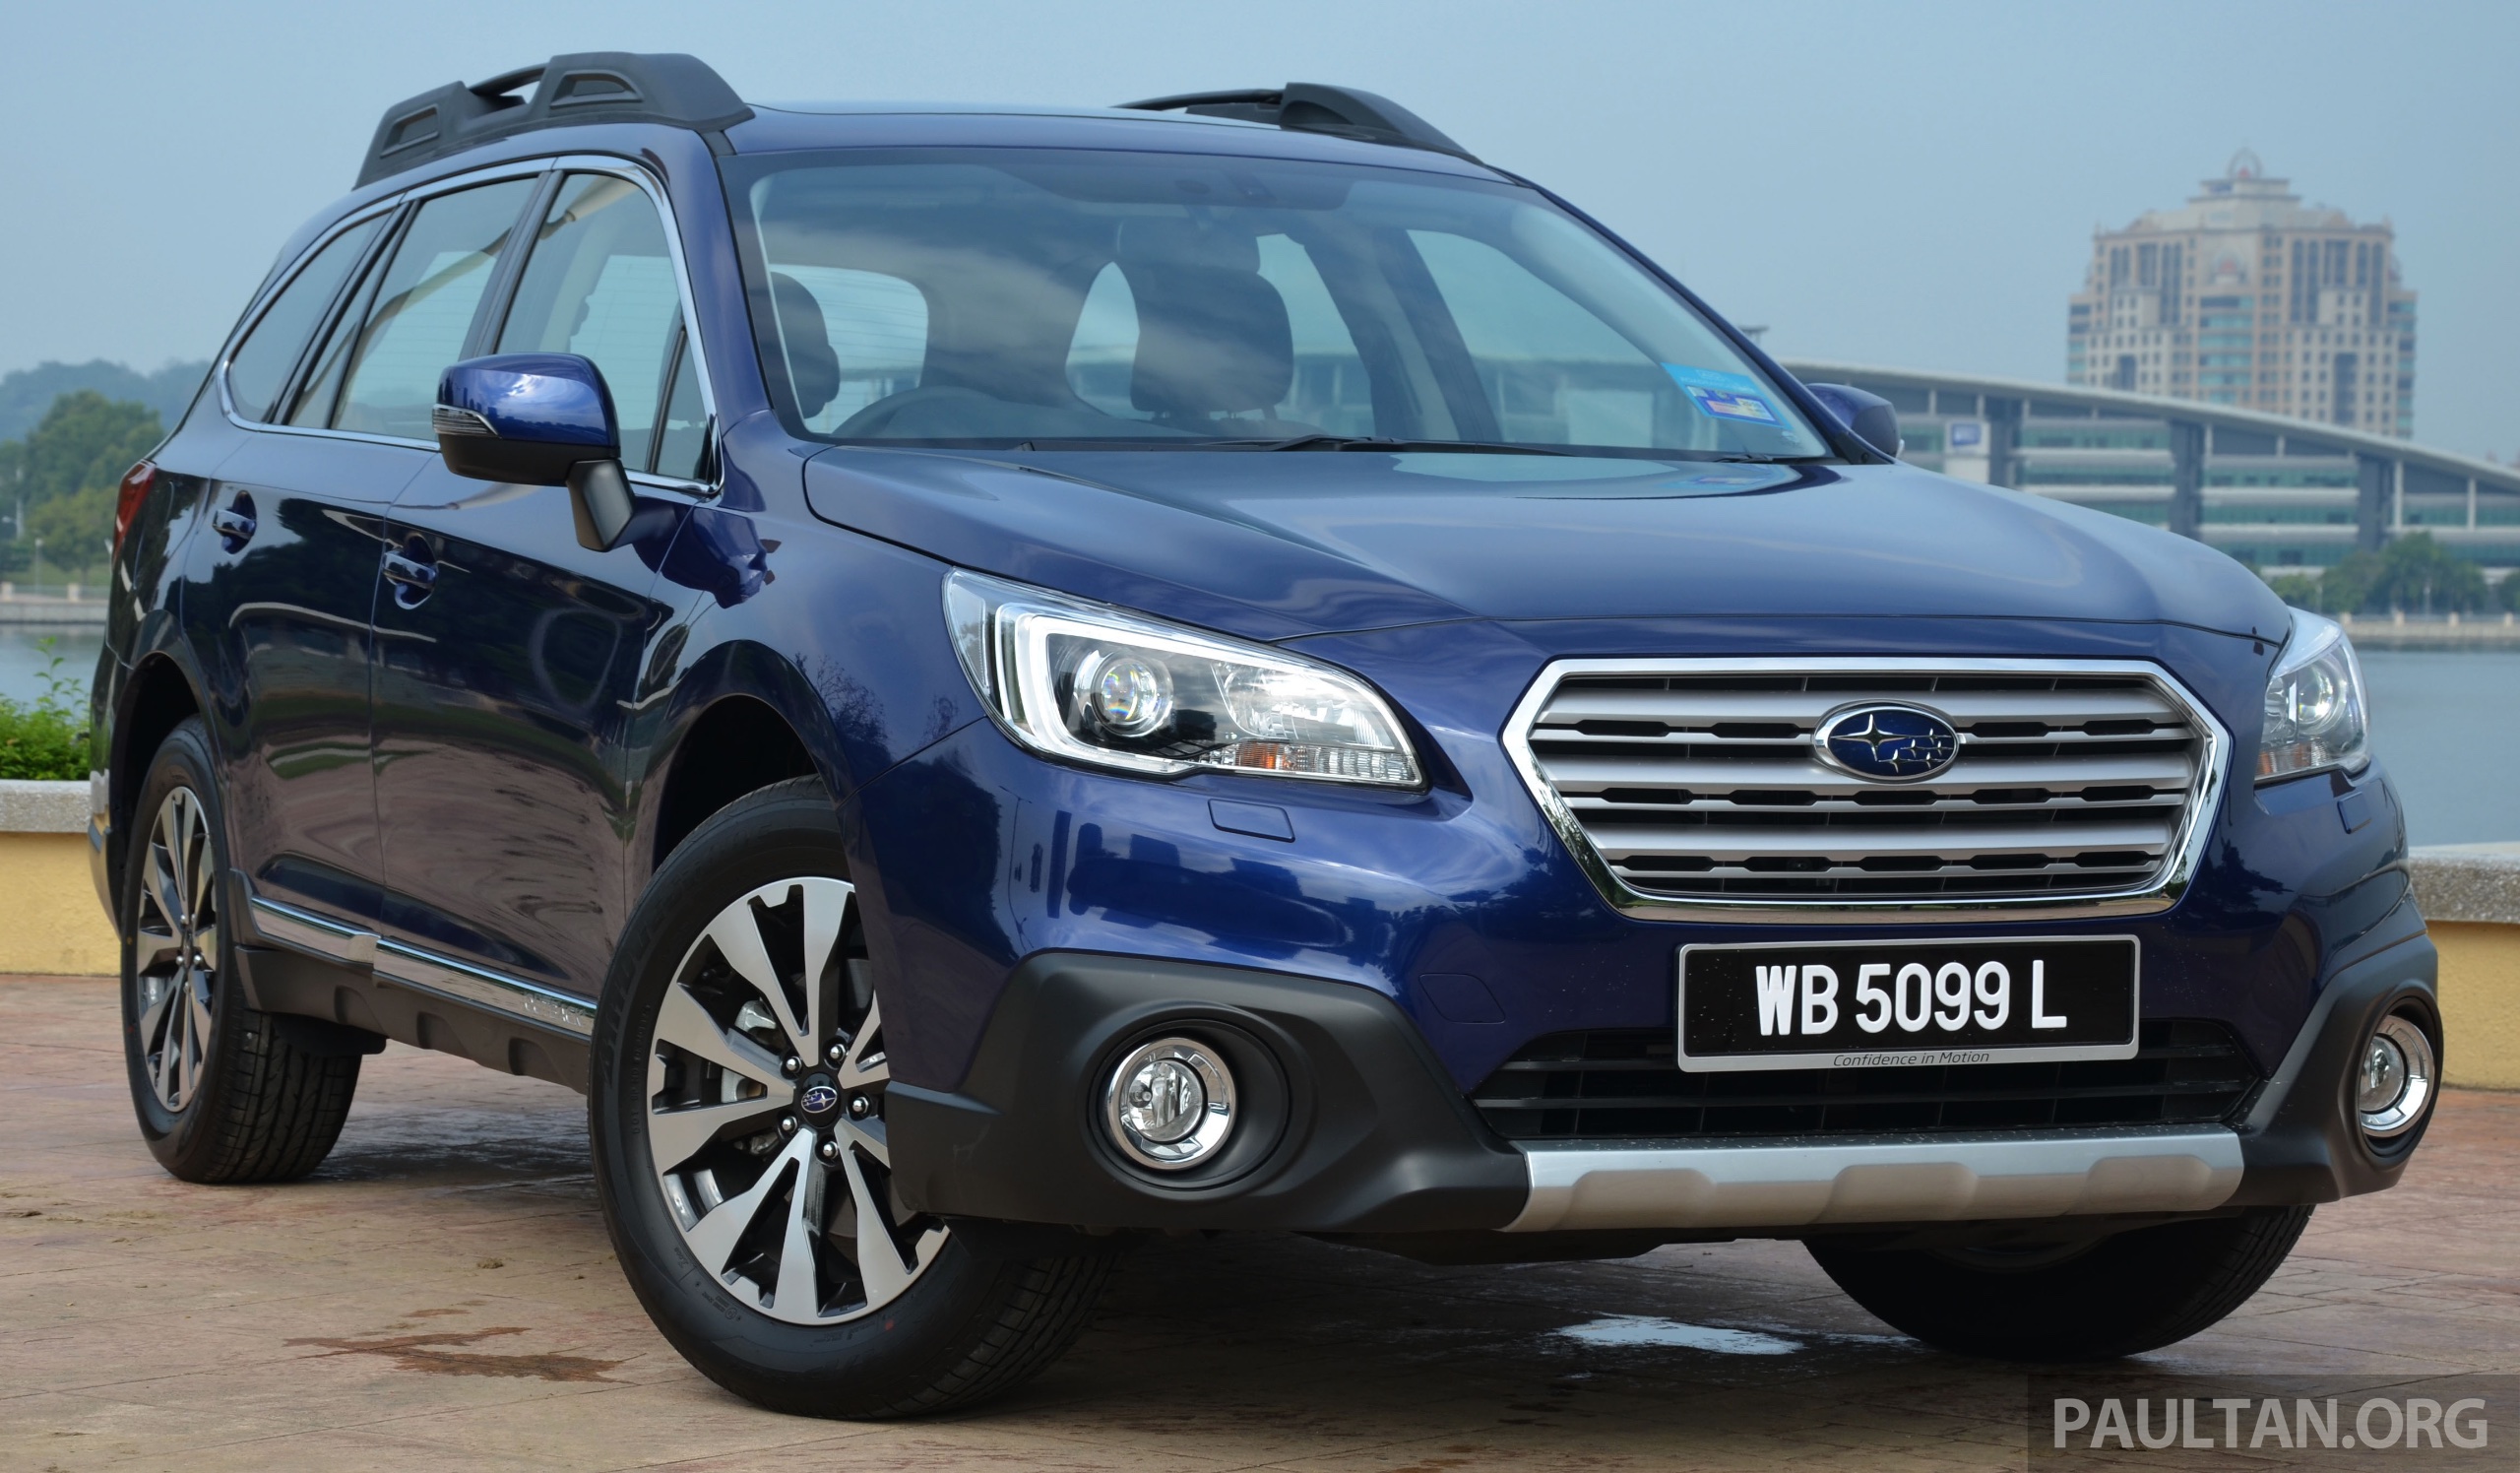 DRIVEN Subaru Outback 2.5iS a Legacy on stilts? 2015